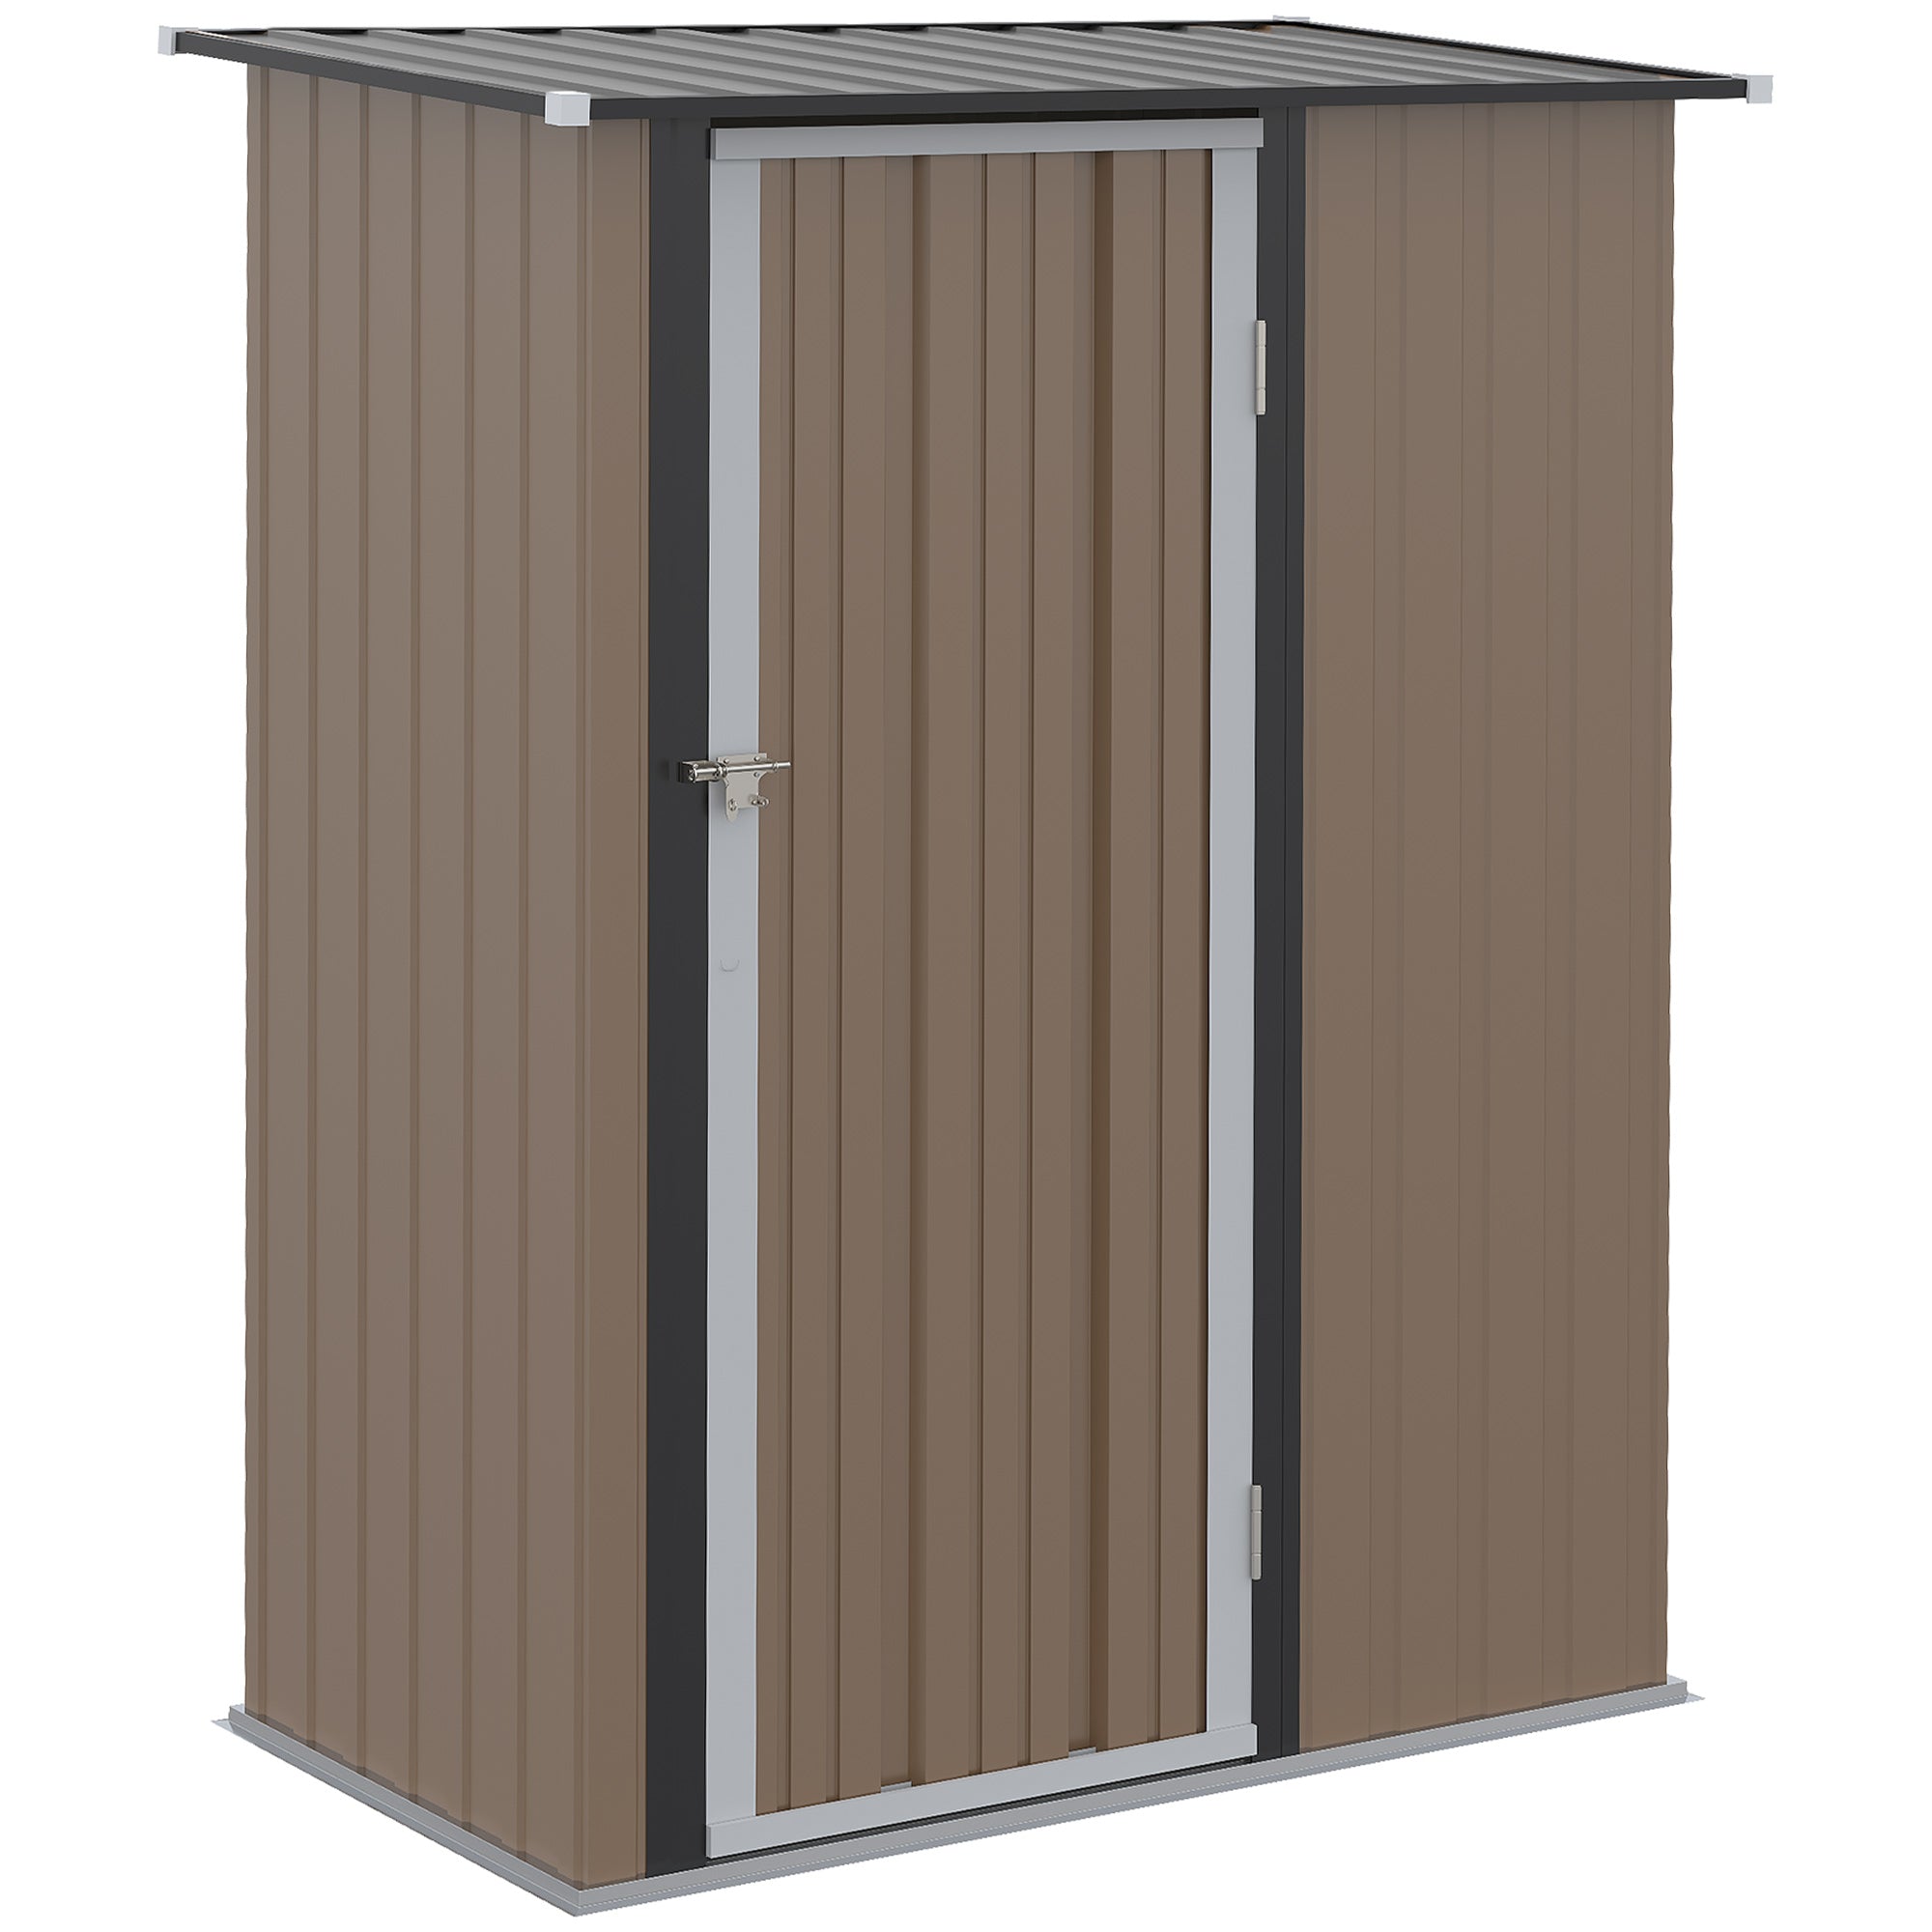 Outsunny 5ft x 3ft Garden Metal Storage Shed, Outdoor Tool Shed with Sloped Roof, Lockable Door for Equipment, Bikes, Brown - TovaHaus